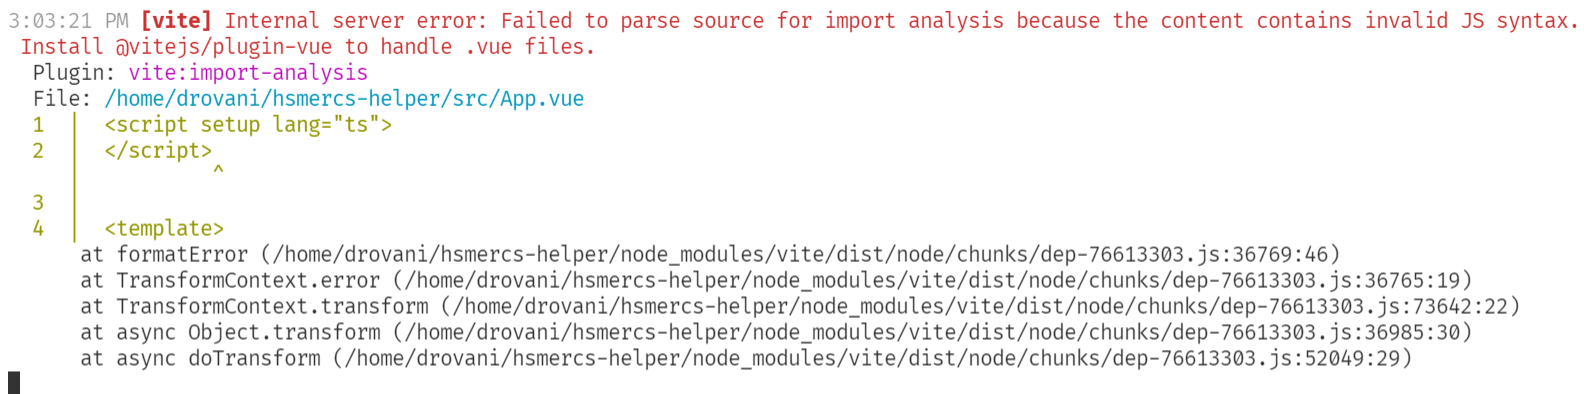 Internal server error: Failed to parse source for import analysis because the content contains invalid JS syntax. Install @vitejs/plugin-vue to handle .vue files.